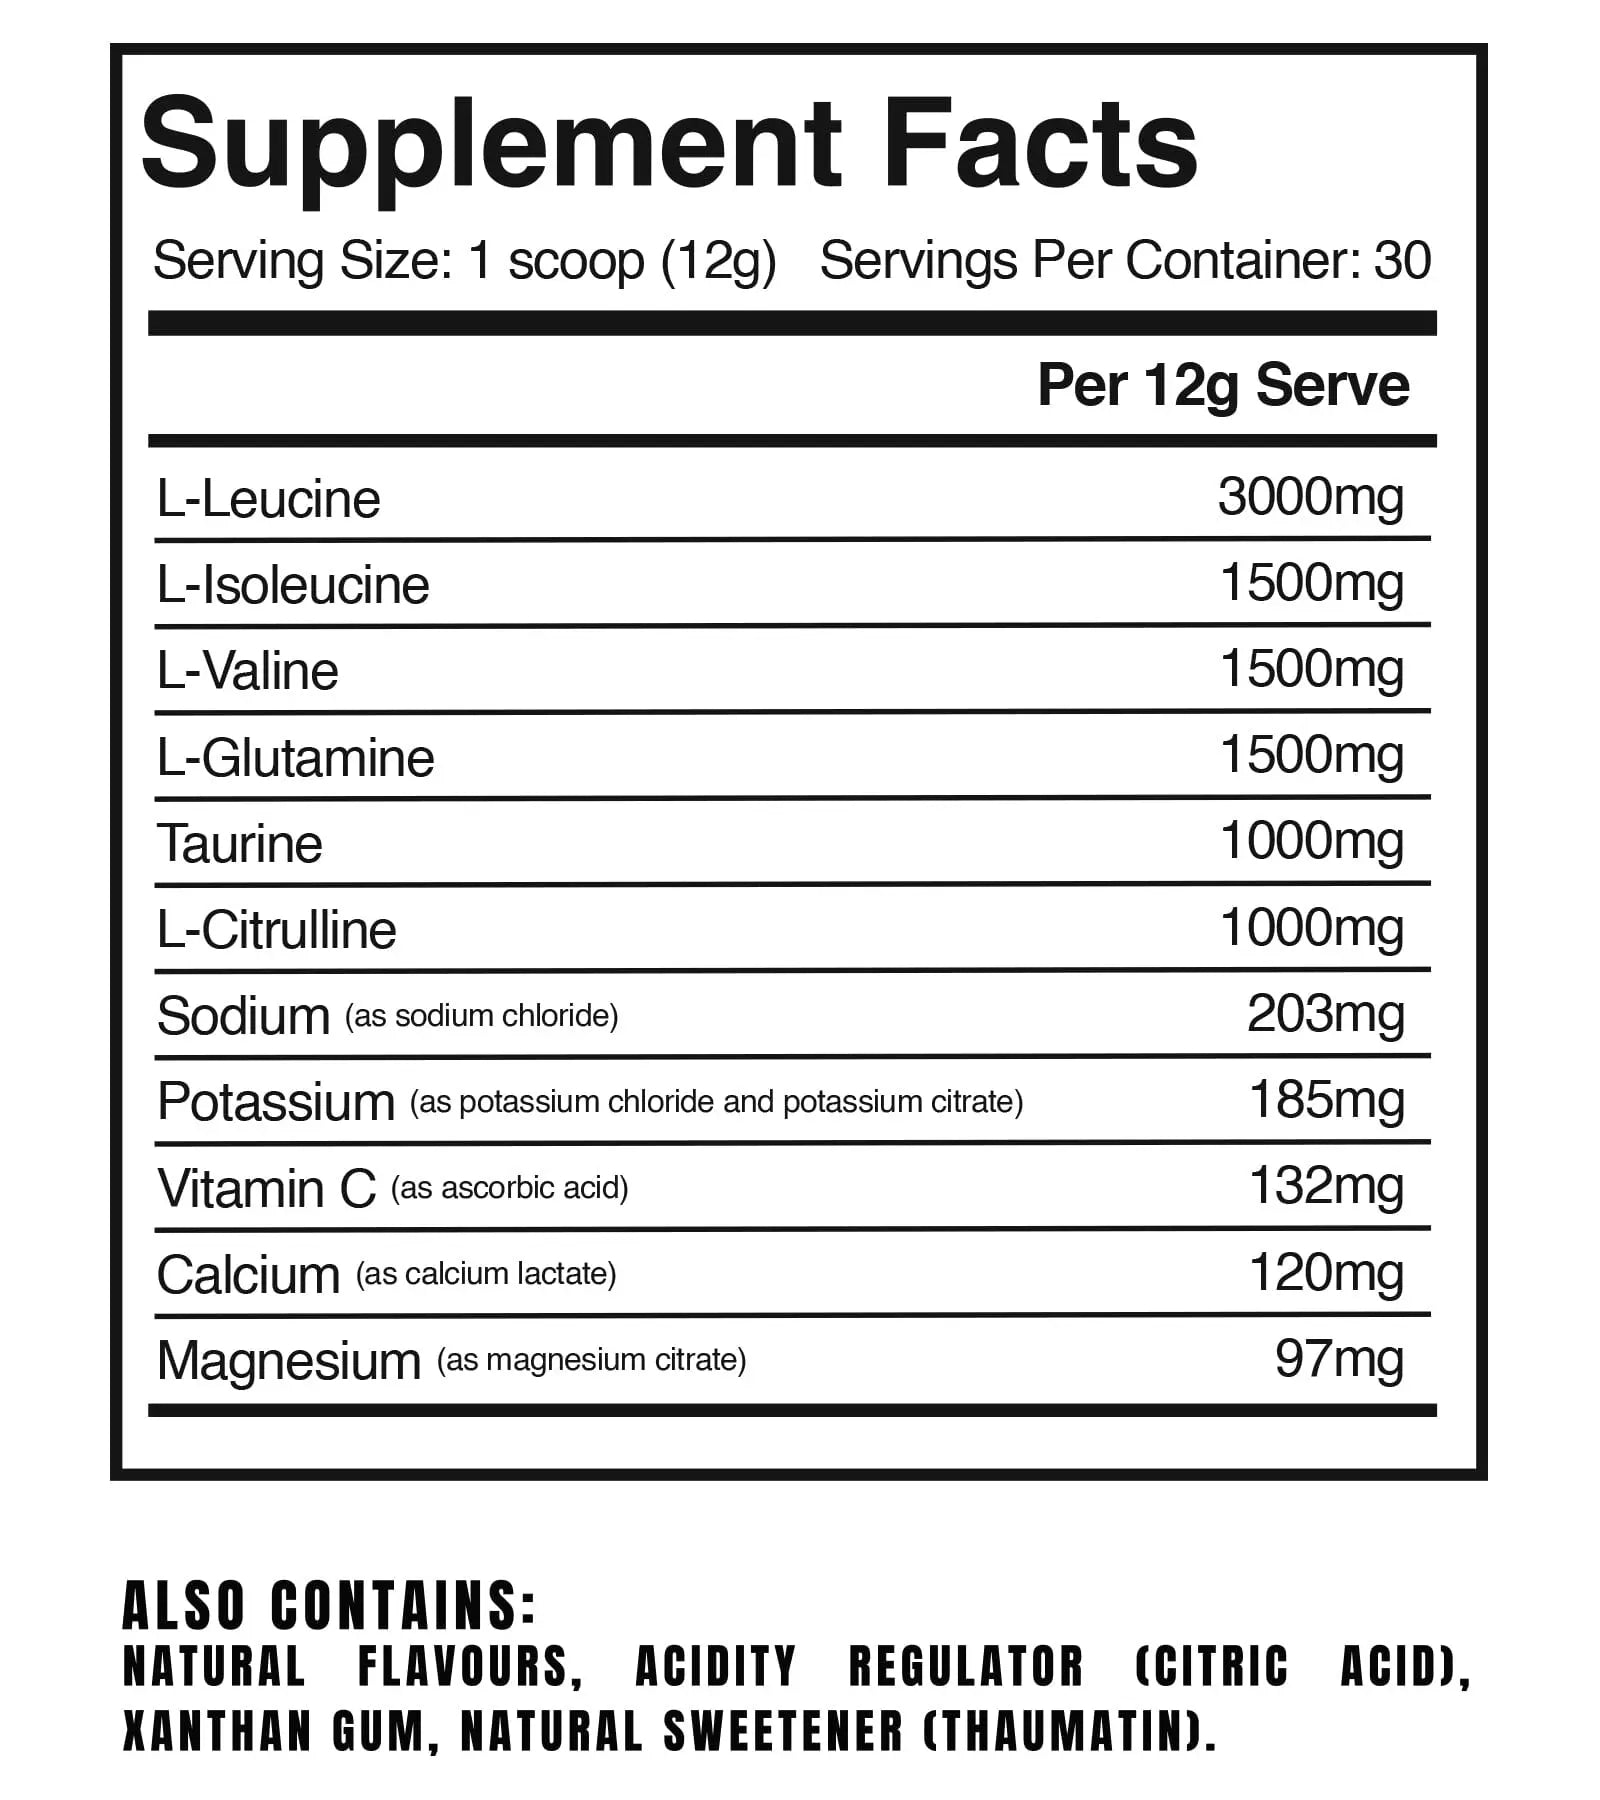 Gladiator Sports Nutrition Spiculus BCAA & Electrolytes